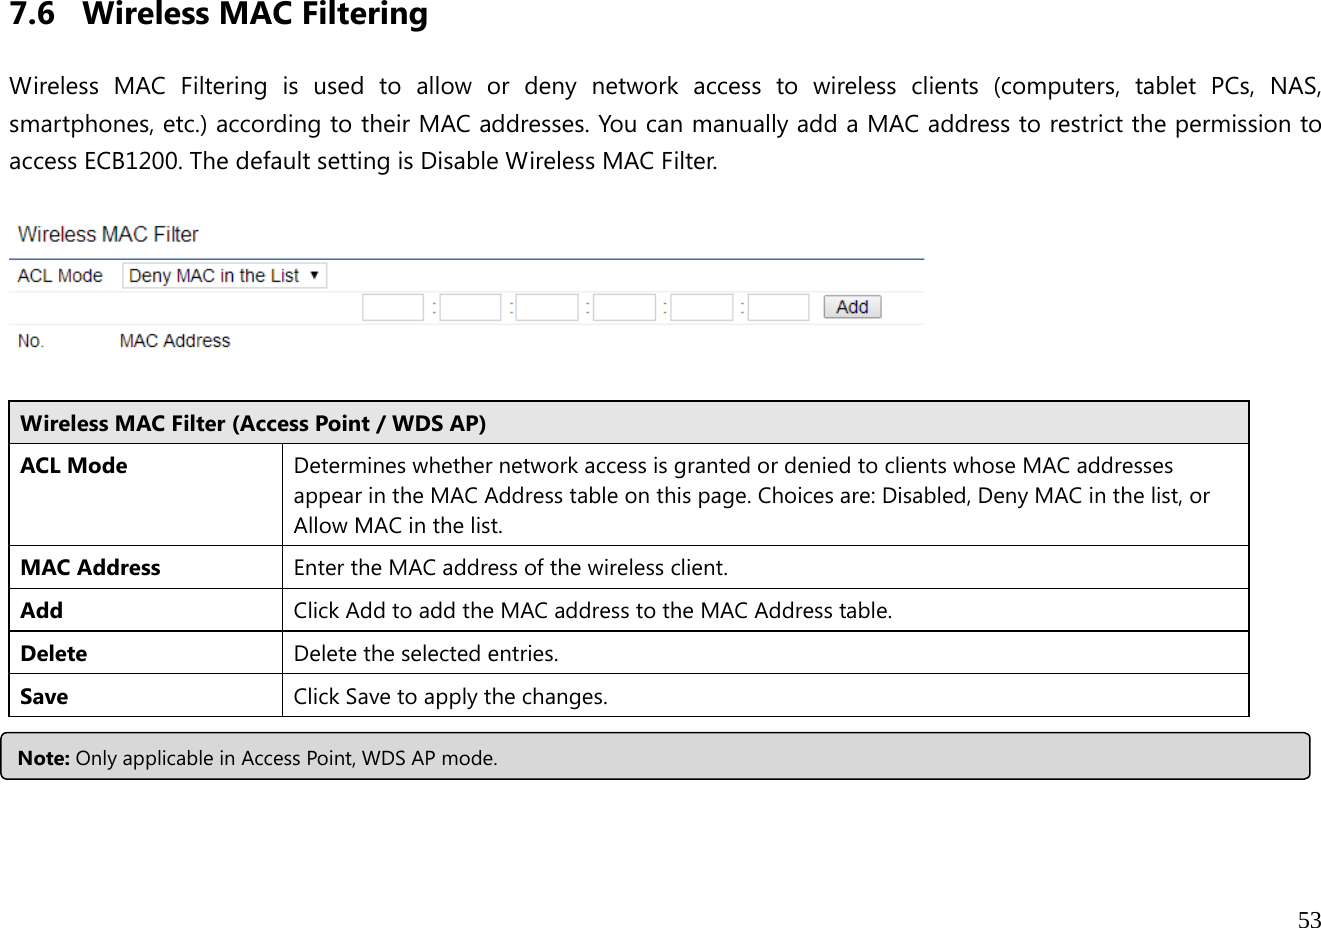  53   7.6 Wireless MAC Filtering  Wireless MAC Filtering is used to allow or deny network access to wireless clients (computers, tablet PCs, NAS, smartphones, etc.) according to their MAC addresses. You can manually add a MAC address to restrict the permission to access ECB1200. The default setting is Disable Wireless MAC Filter.    Wireless MAC Filter (Access Point / WDS AP) ACL Mode Determines whether network access is granted or denied to clients whose MAC addresses appear in the MAC Address table on this page. Choices are: Disabled, Deny MAC in the list, or Allow MAC in the list. MAC Address  Enter the MAC address of the wireless client.Add  Click Add to add the MAC address to the MAC Address table. Delete  Delete the selected entries. Save Click Save to apply the changes.  Note: Only applicable in Access Point, WDS AP mode.